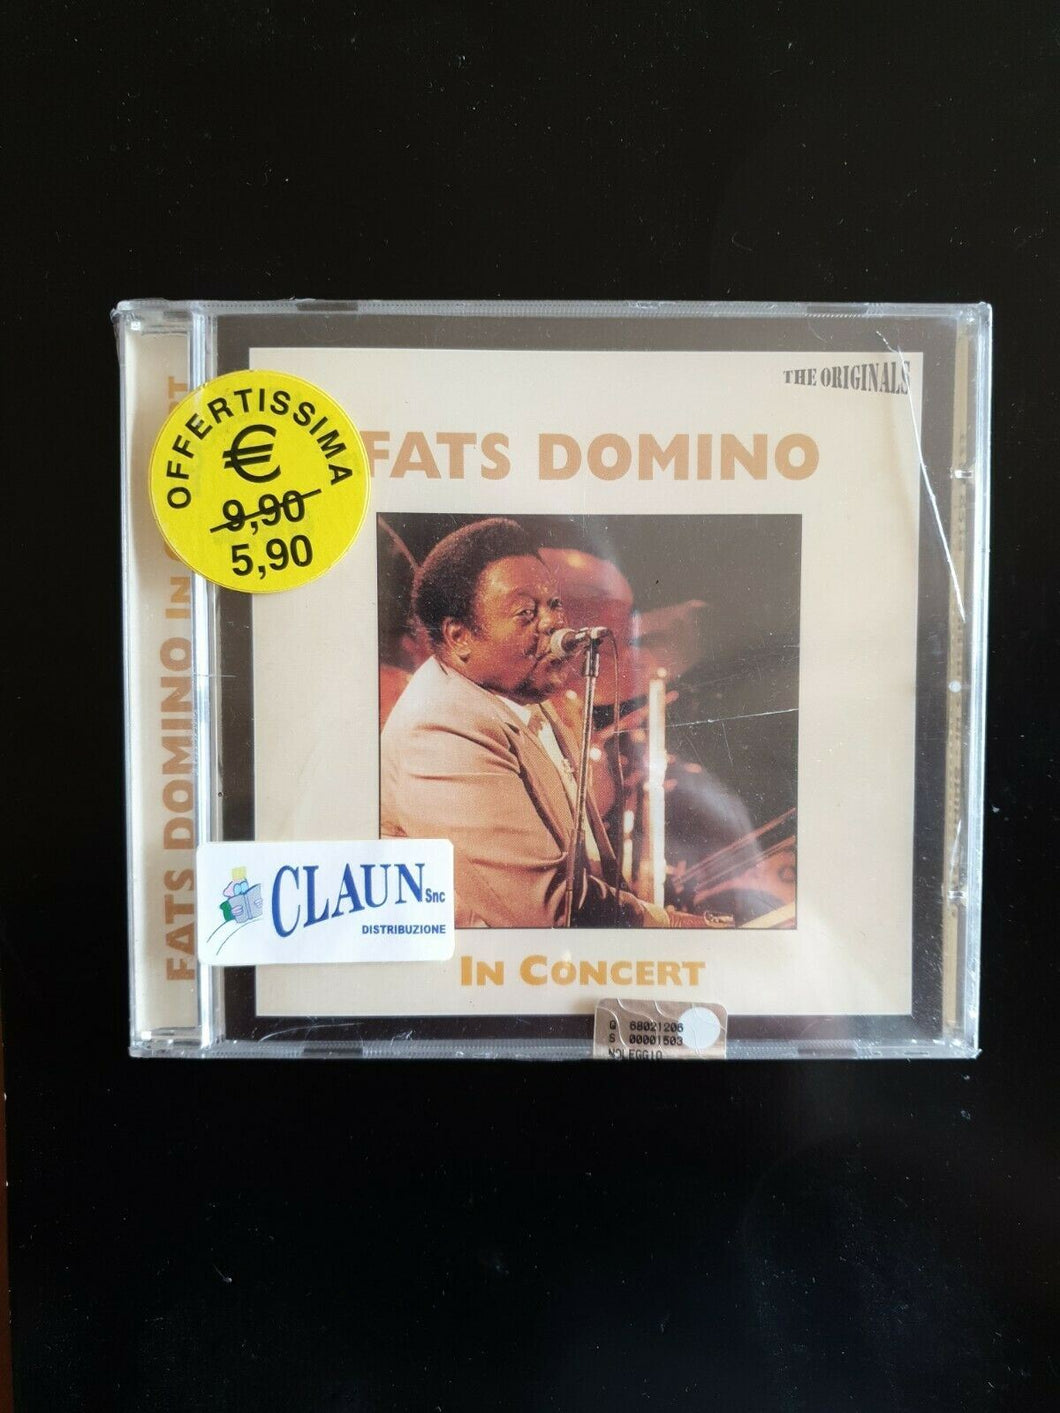 FATS DOMINO IN CONCERT DLCD 4152 1991 CD Nuovo